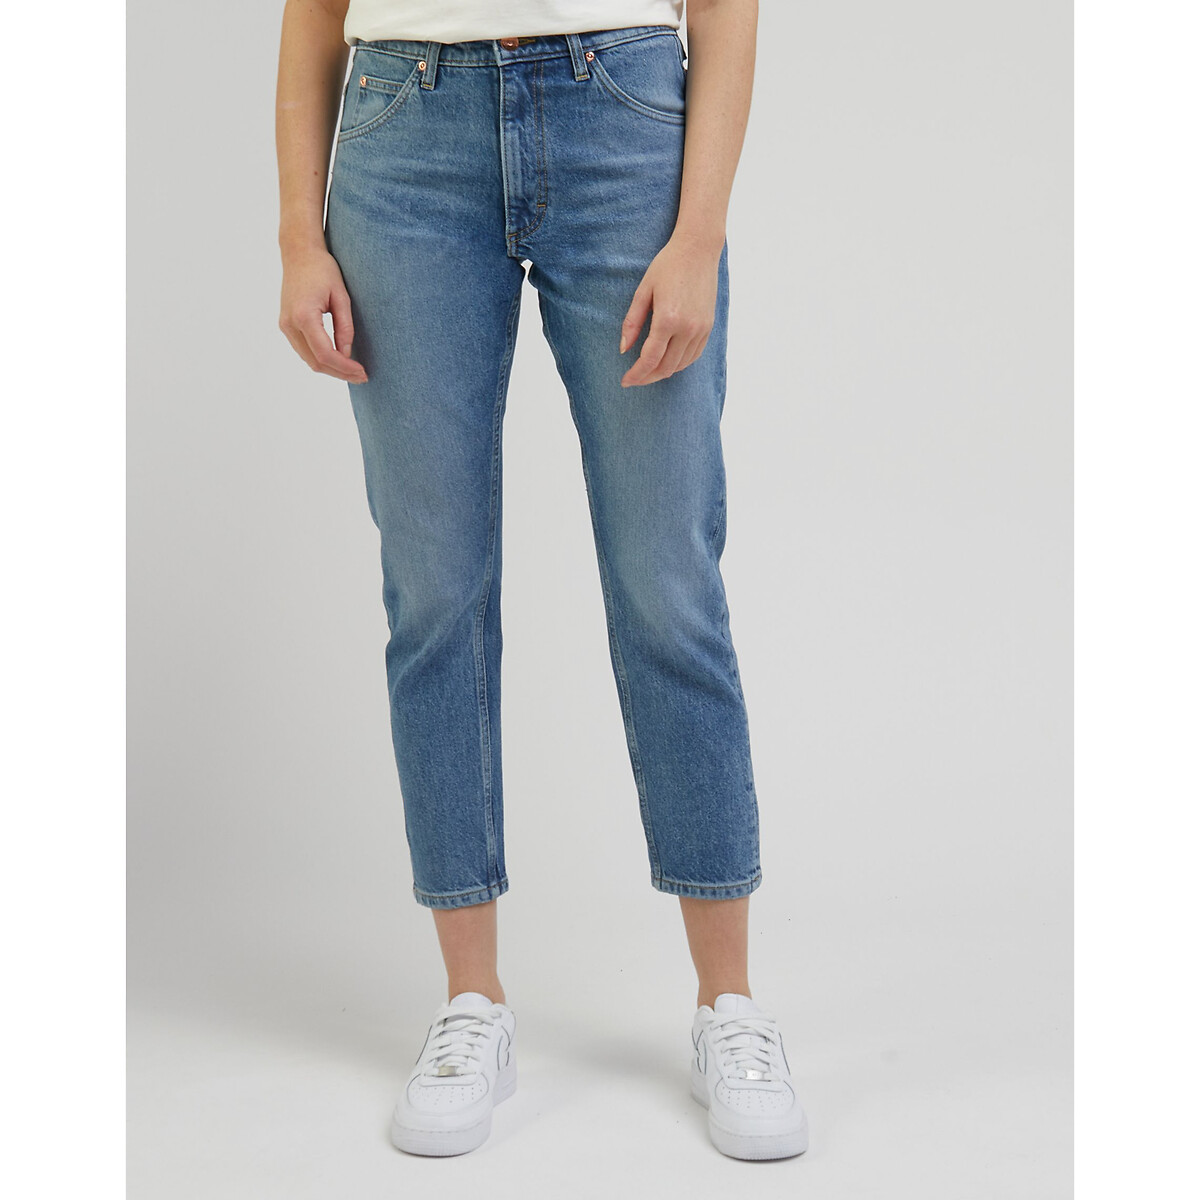 Rider Slim Straight Jeans in Mid Rise